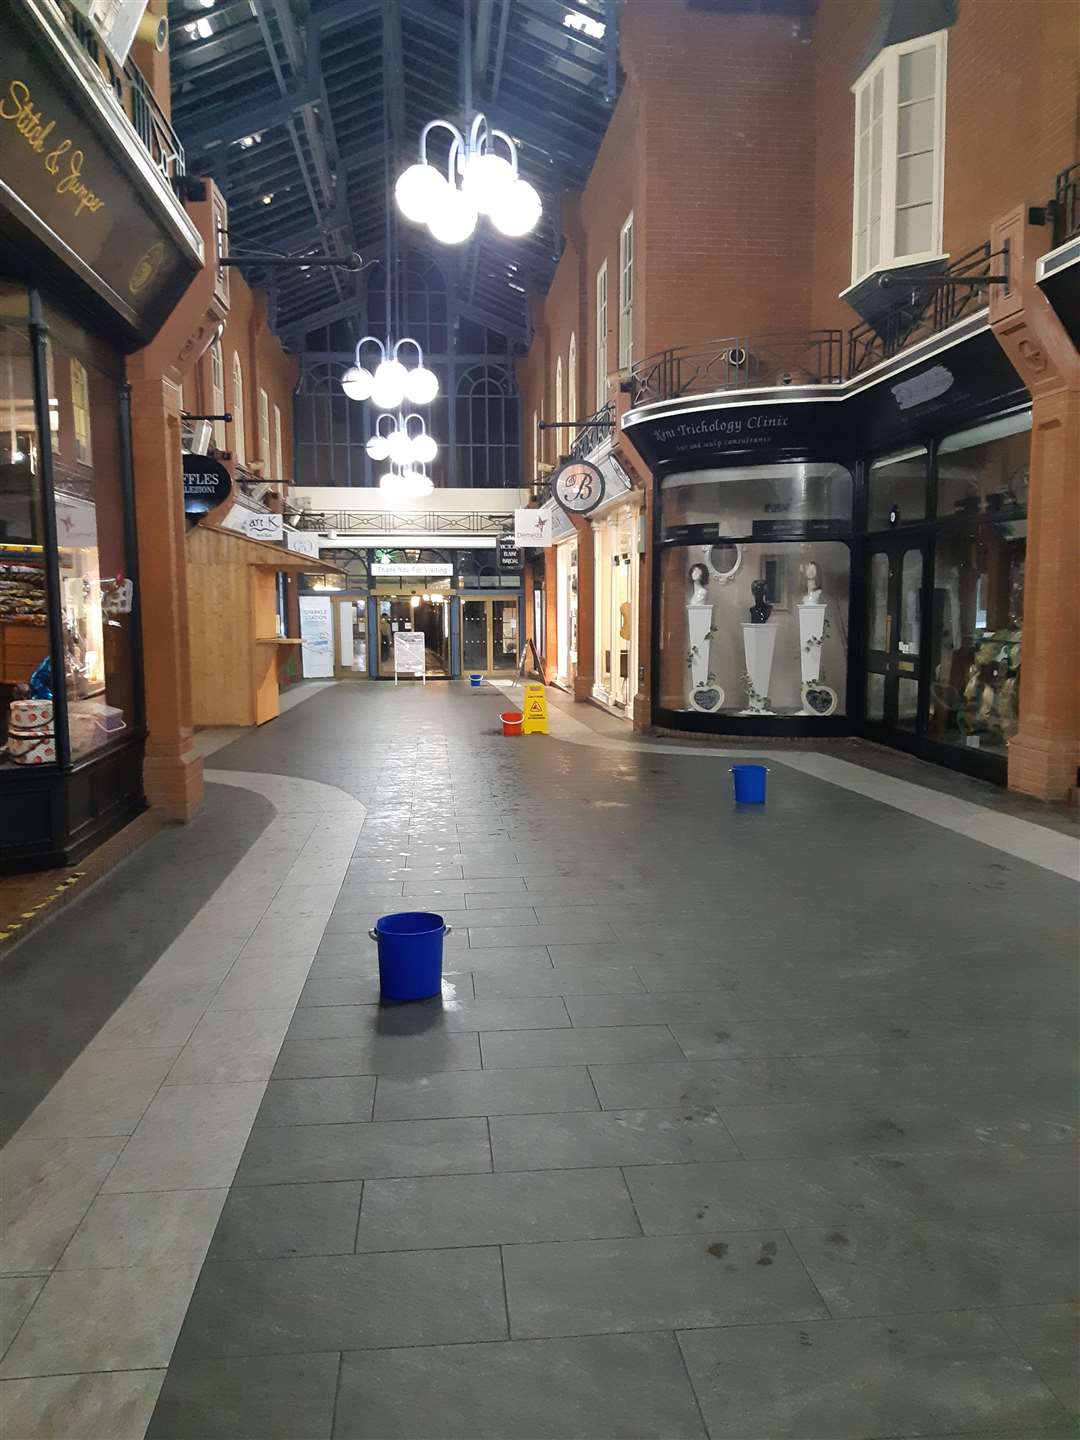 Buckets were placed in Royal Star Arcade to catch the water seeping through the roof